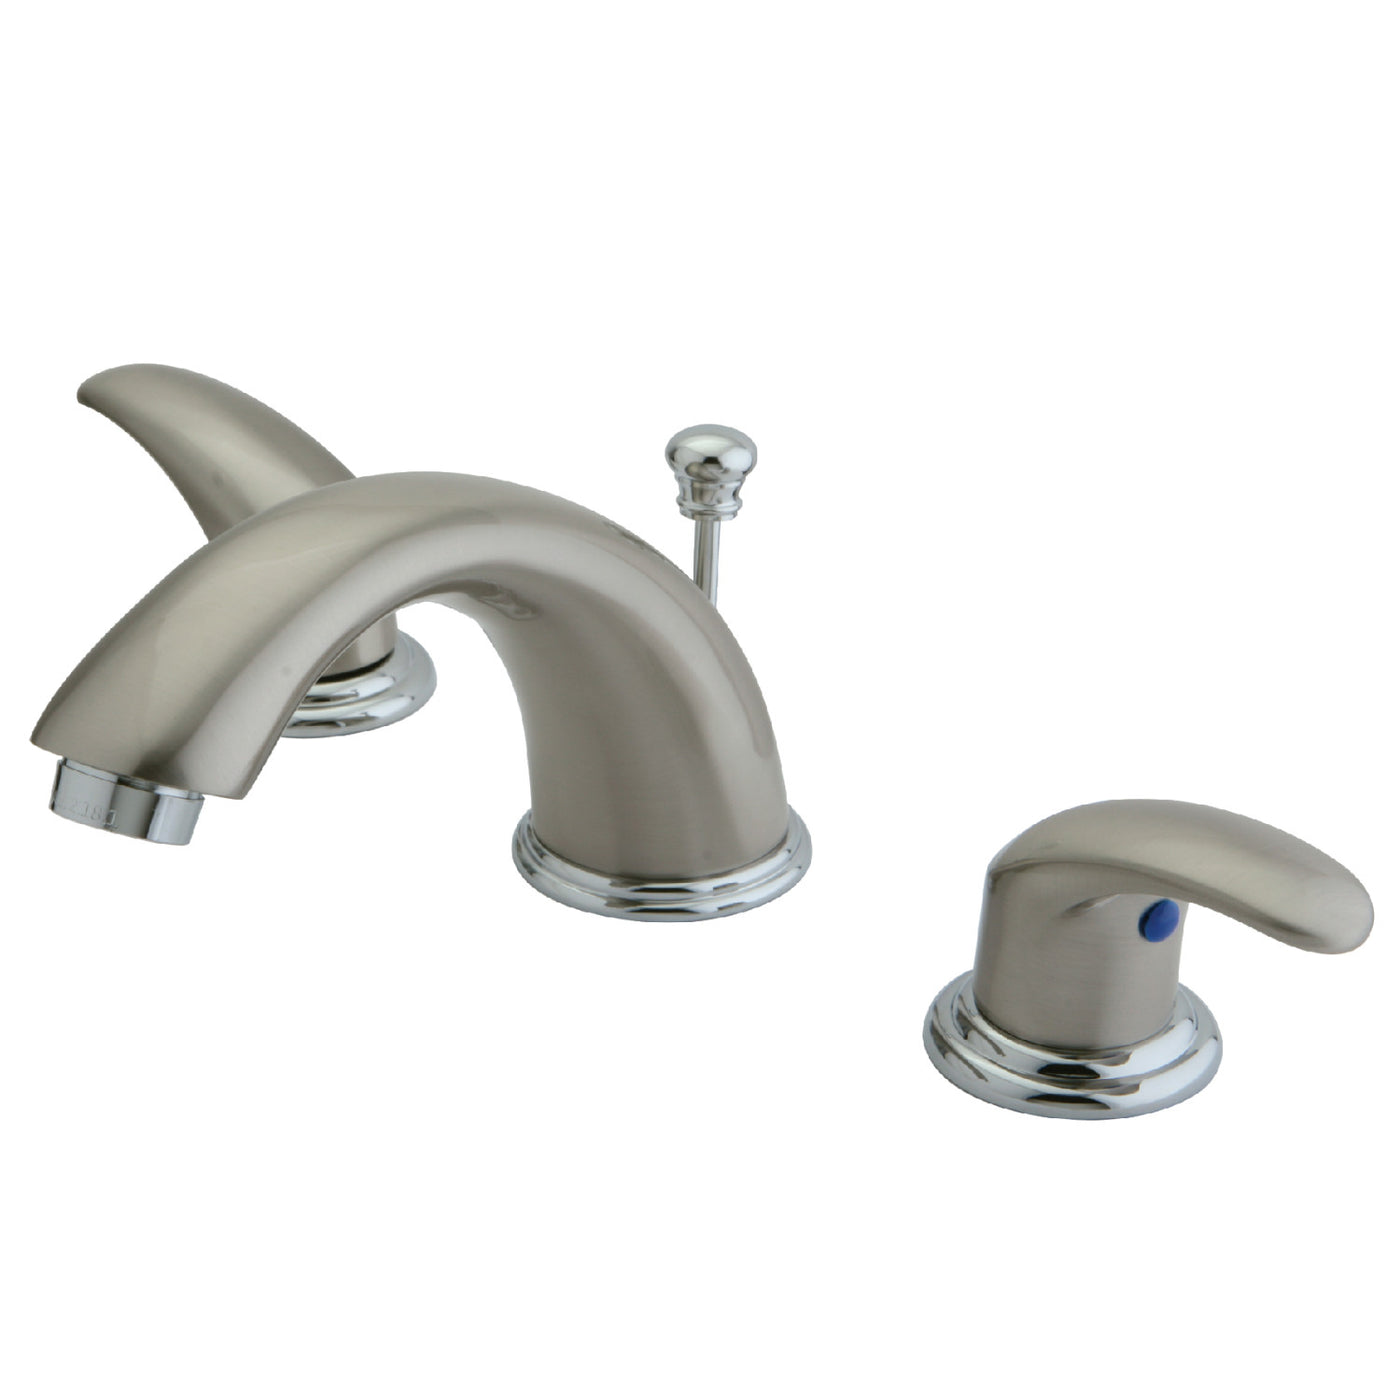 Elements of Design EB6967LL Widespread Bathroom Faucet with Retail Pop-Up, Brushed Nickel/Polished Chrome